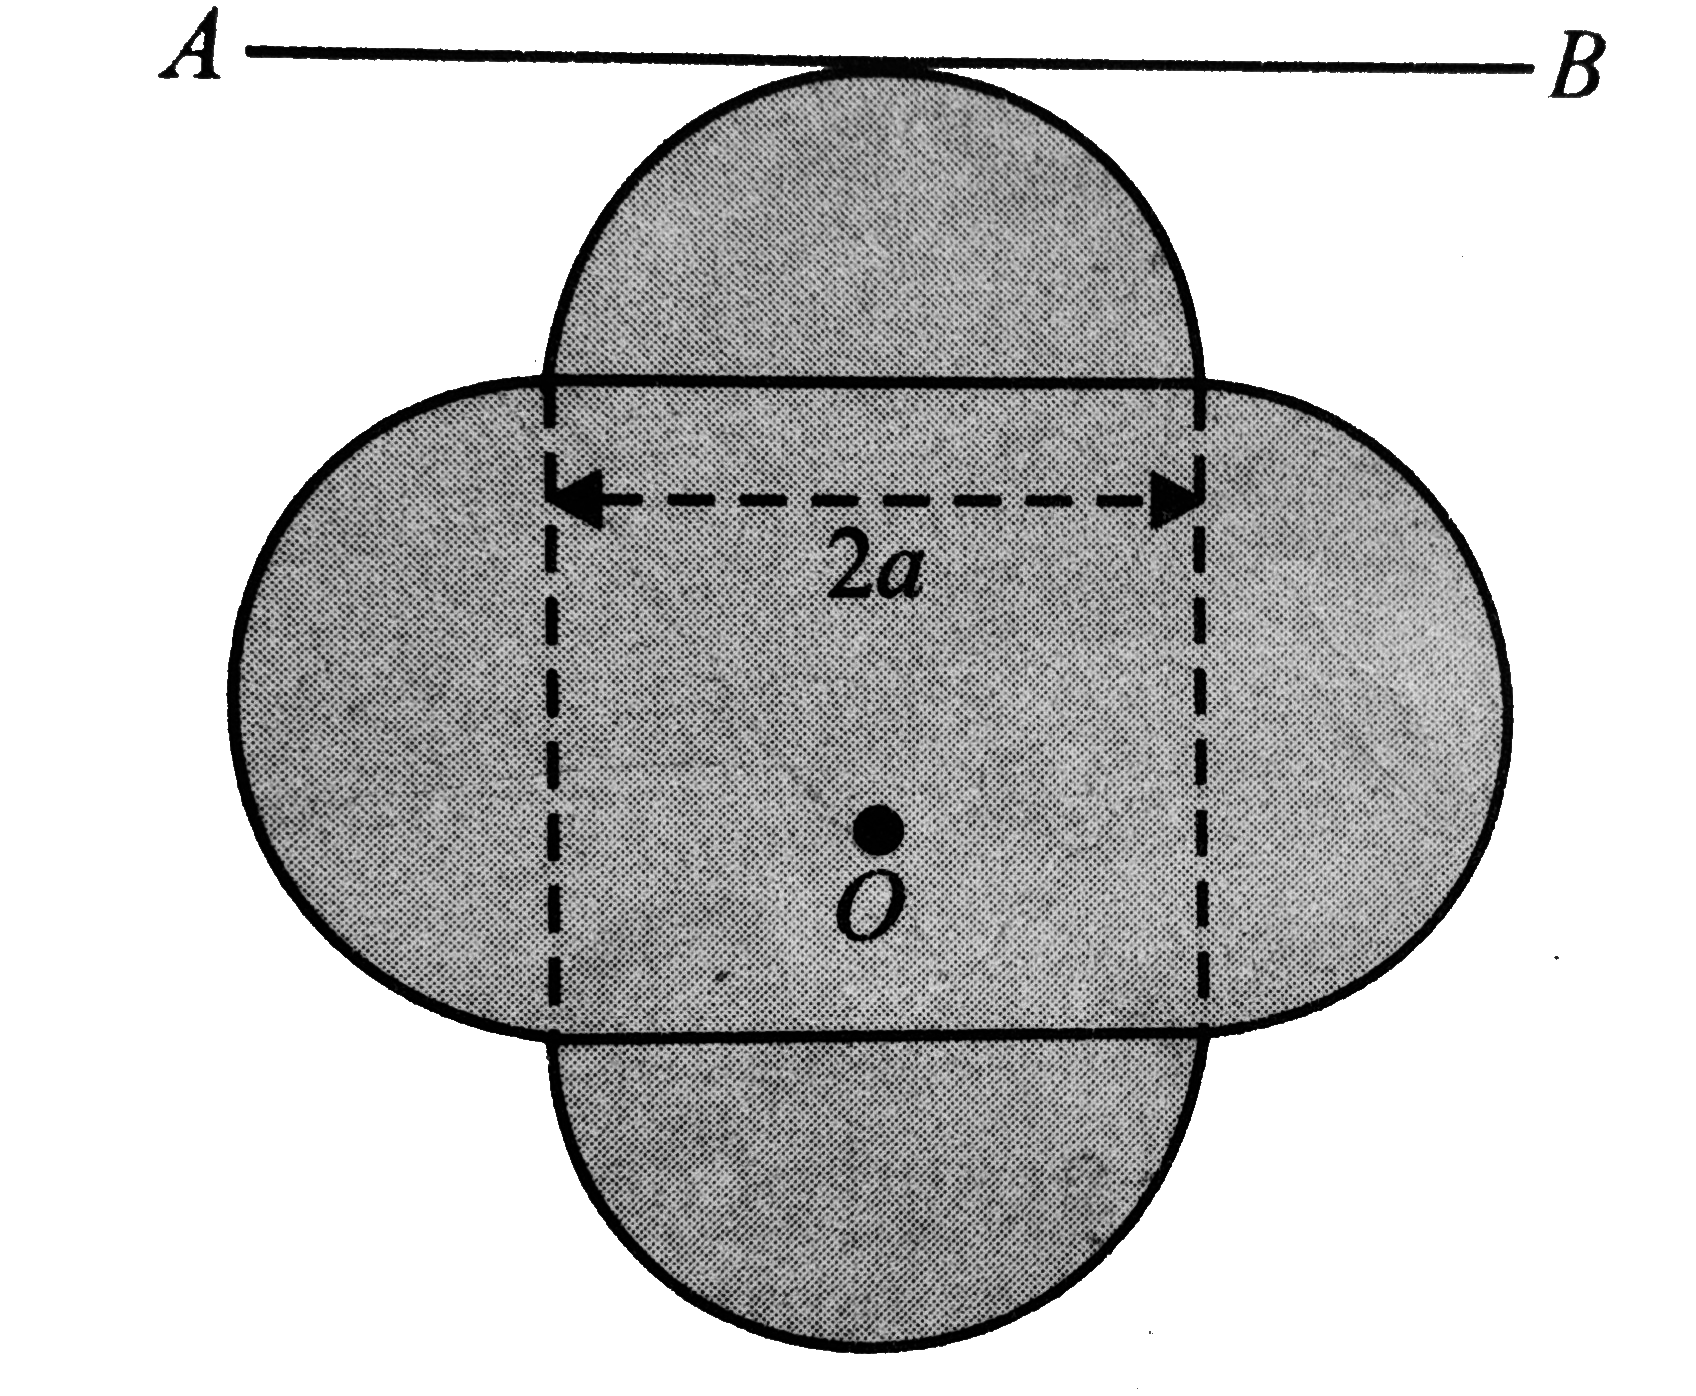 A symmetric lamina of mass M consists of a square shape with a semicircular section over of the edge of the square as shown in Fig. The side of the square is 2a. The moment of inertia of the lamina about an axis through its centre of mass and perpendicular to the plane is 1.6Ma^(2). The moment of inertia of the lamina about the tangent AB in the plane of the lamina is.